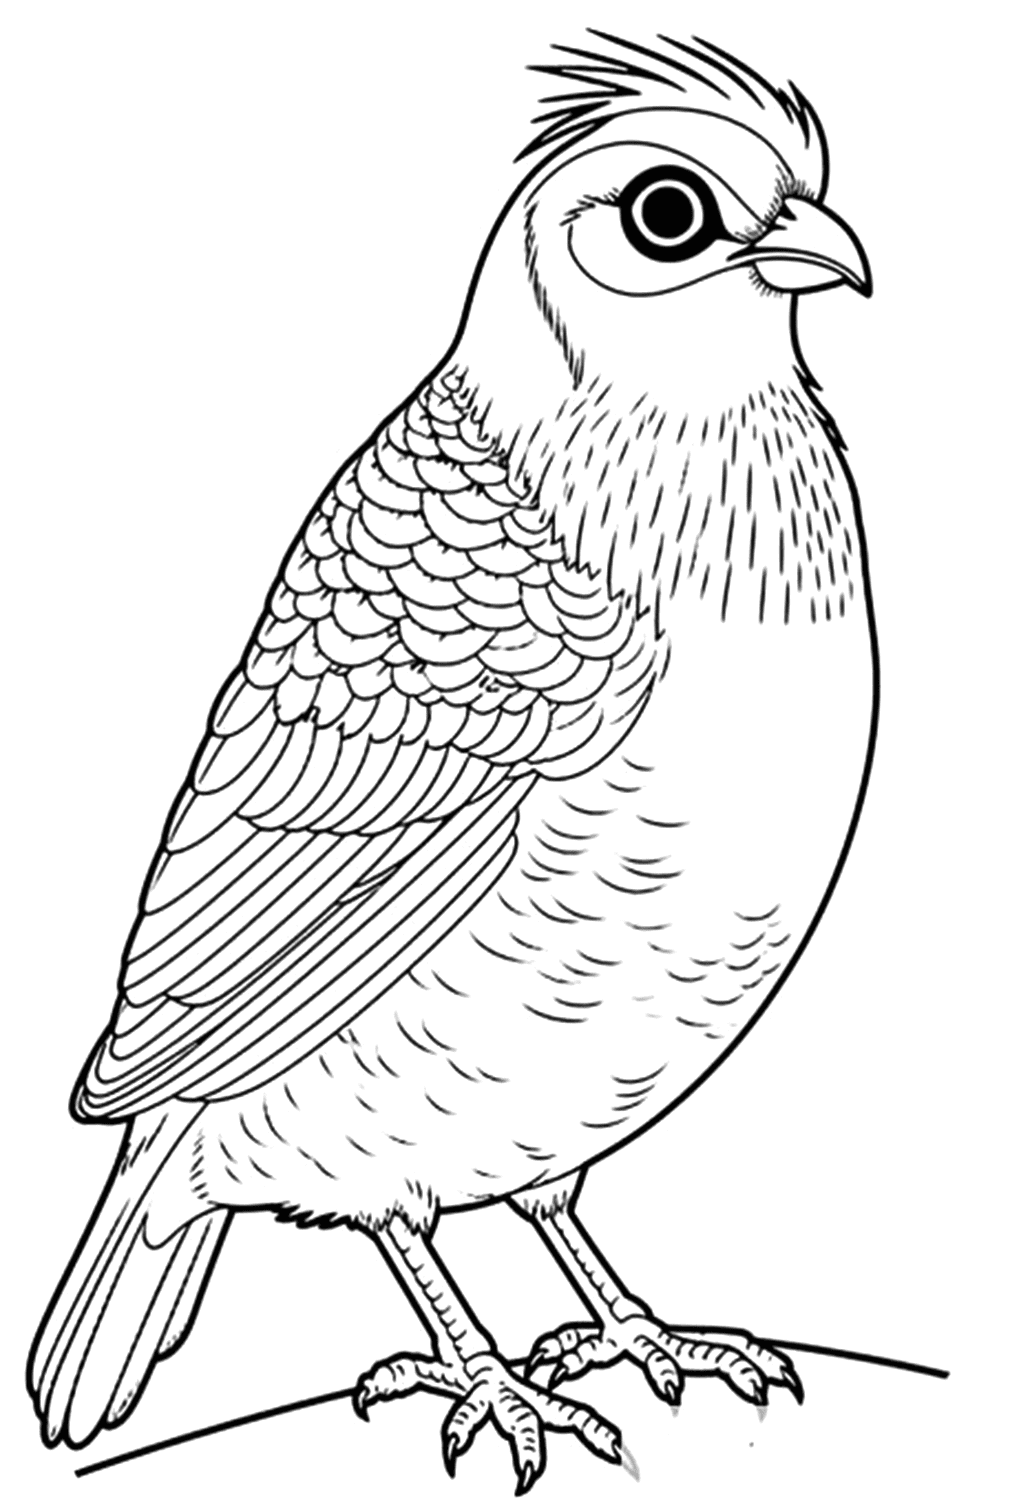 Awesome Quail Coloring Sheet - Free Printable Coloring Pages